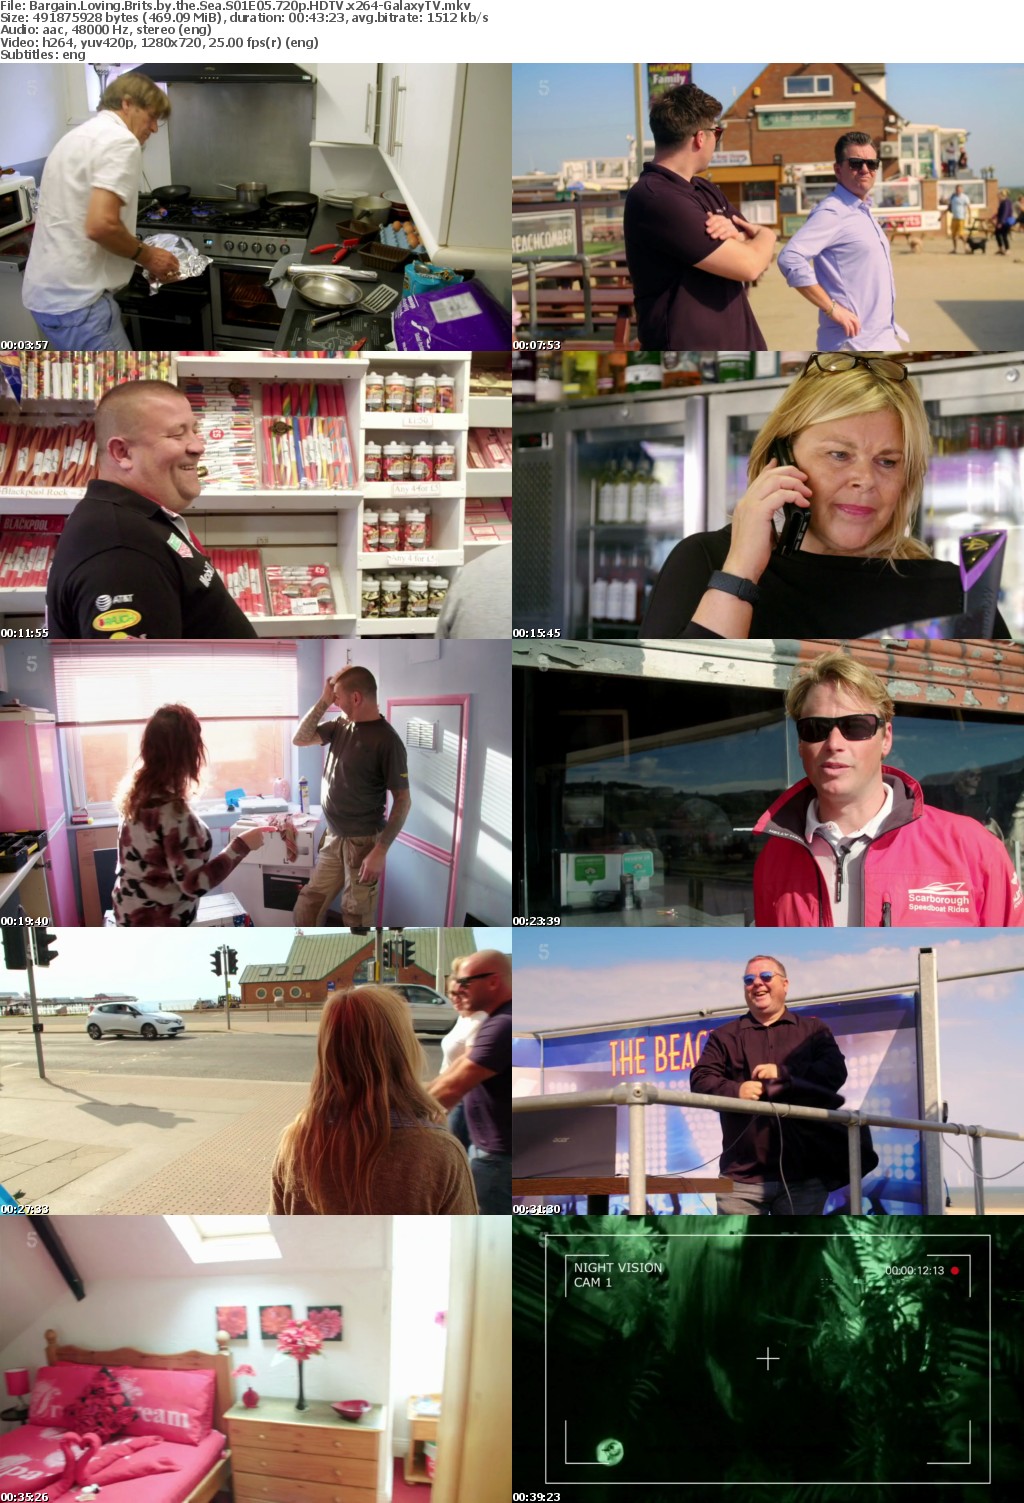 Bargain Loving Brits by the Sea S01 COMPLETE 720p HDTV x264-GalaxyTV